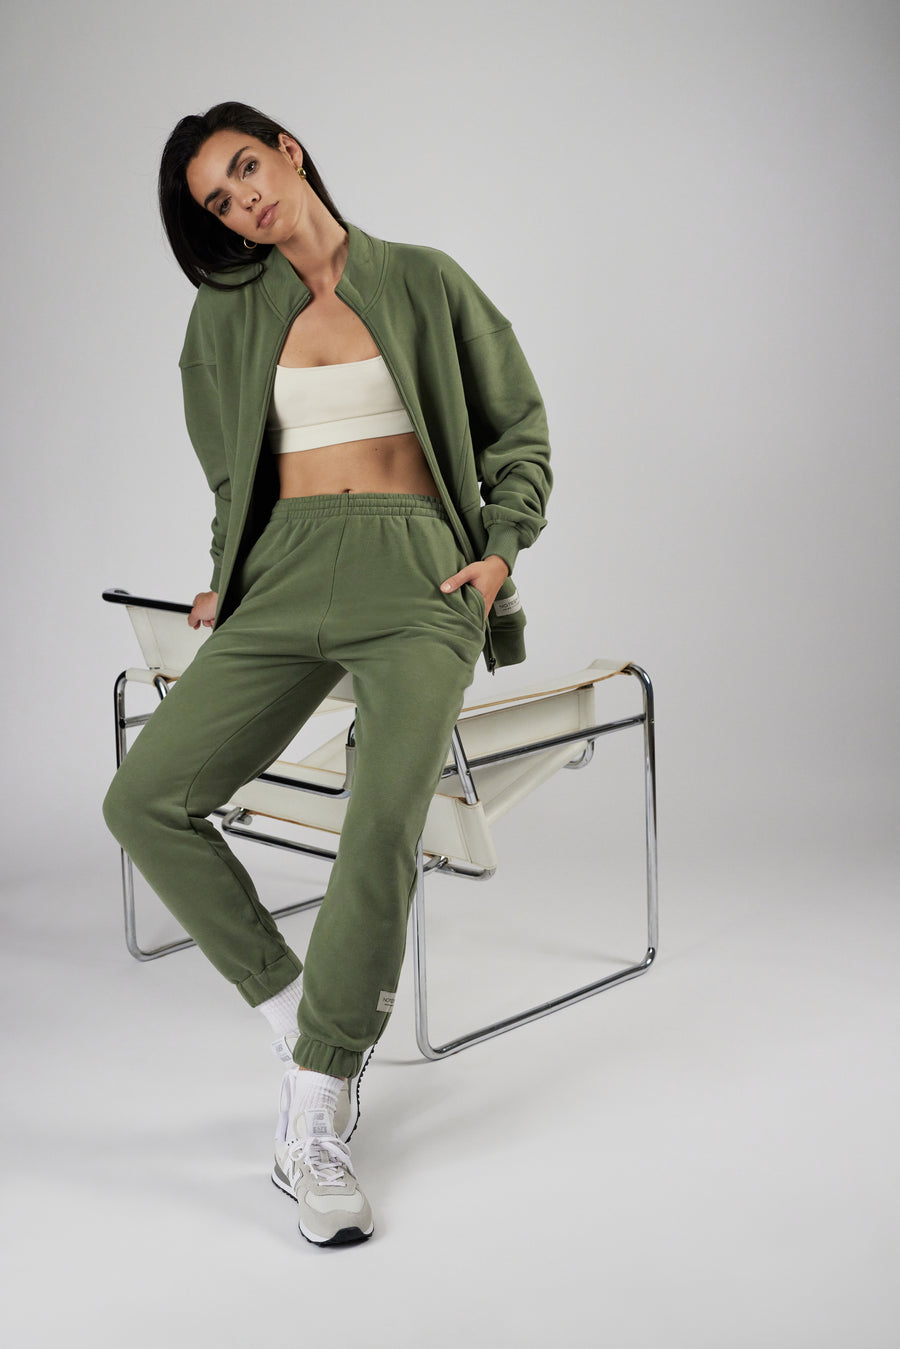 Woman wearing unisex sweatpants and zipper jacket in color sage green